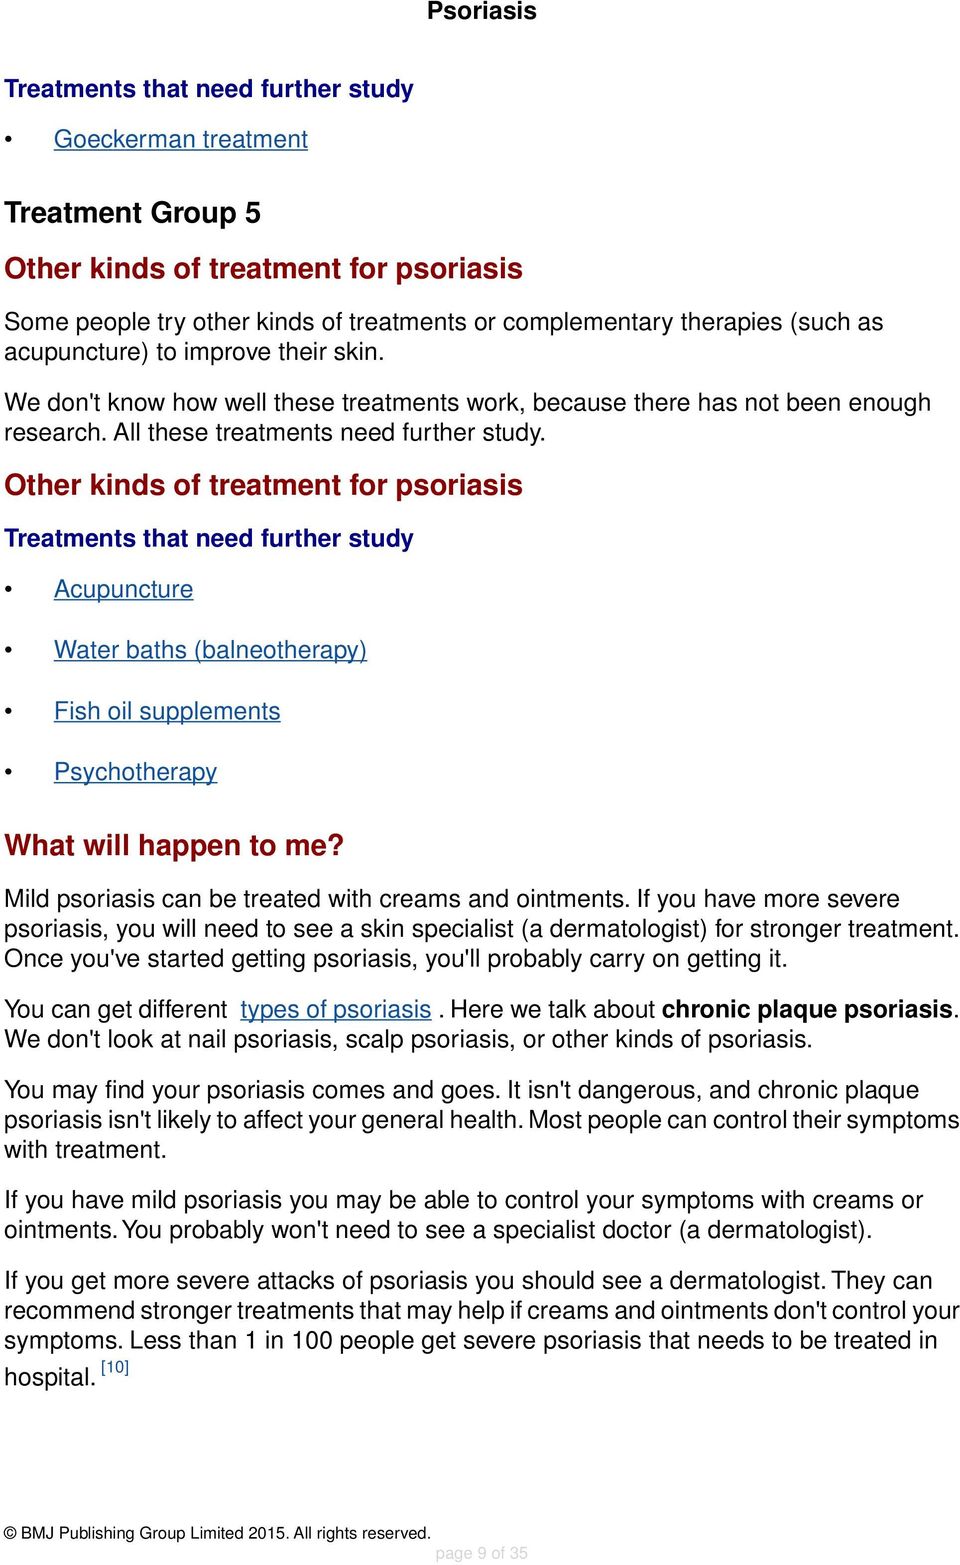 Other kinds of treatment for psoriasis Treatments that need further study Acupuncture Water baths (balneotherapy) Fish oil supplements Psychotherapy What will happen to me?